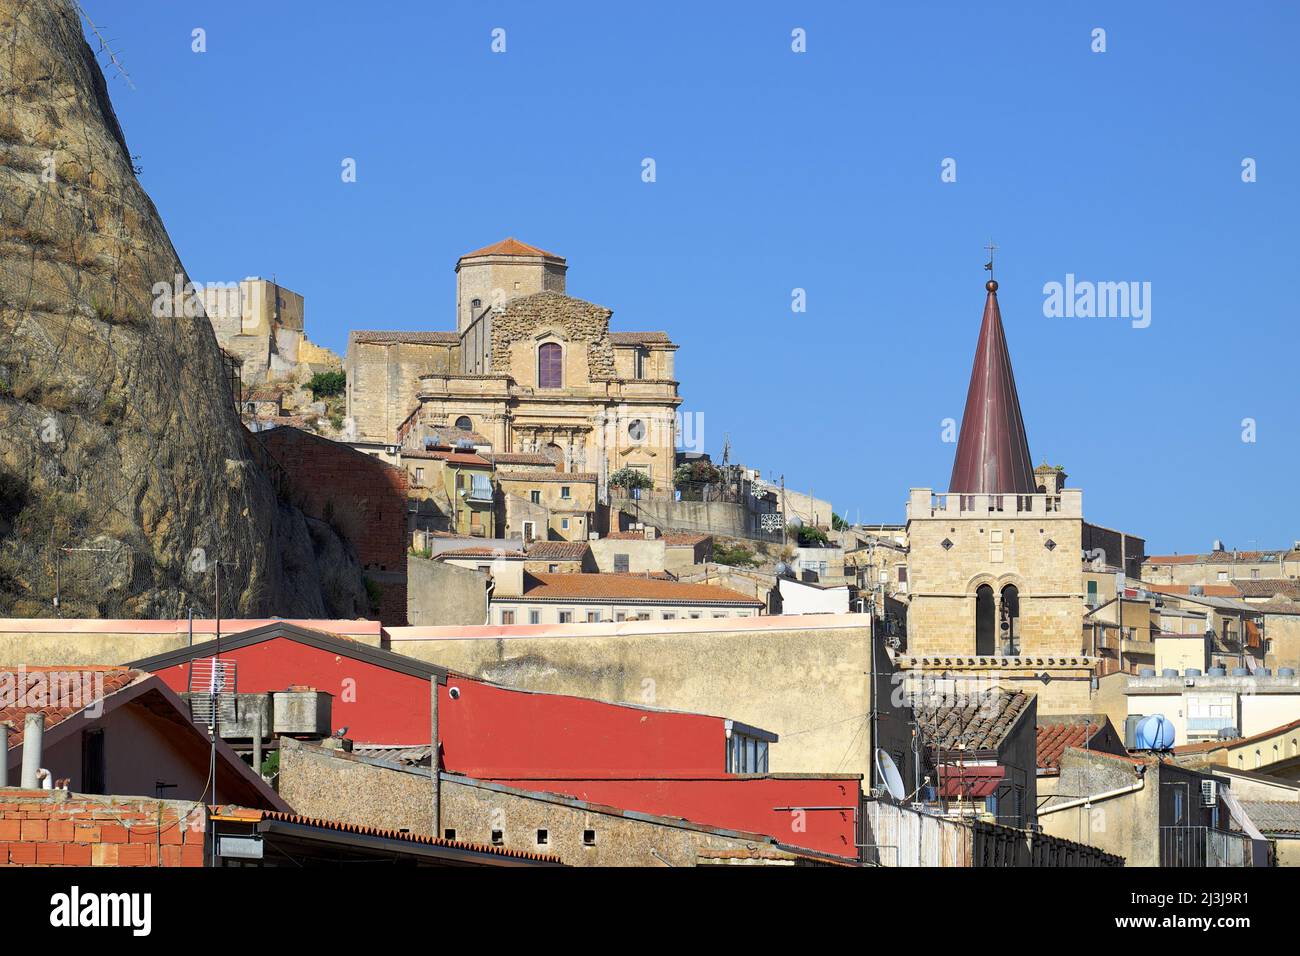 Basilica of Santa Maria Maggiore and bell tower of San Nicola Cathedral in Nicosia Old Town, Sicily Stock Photo